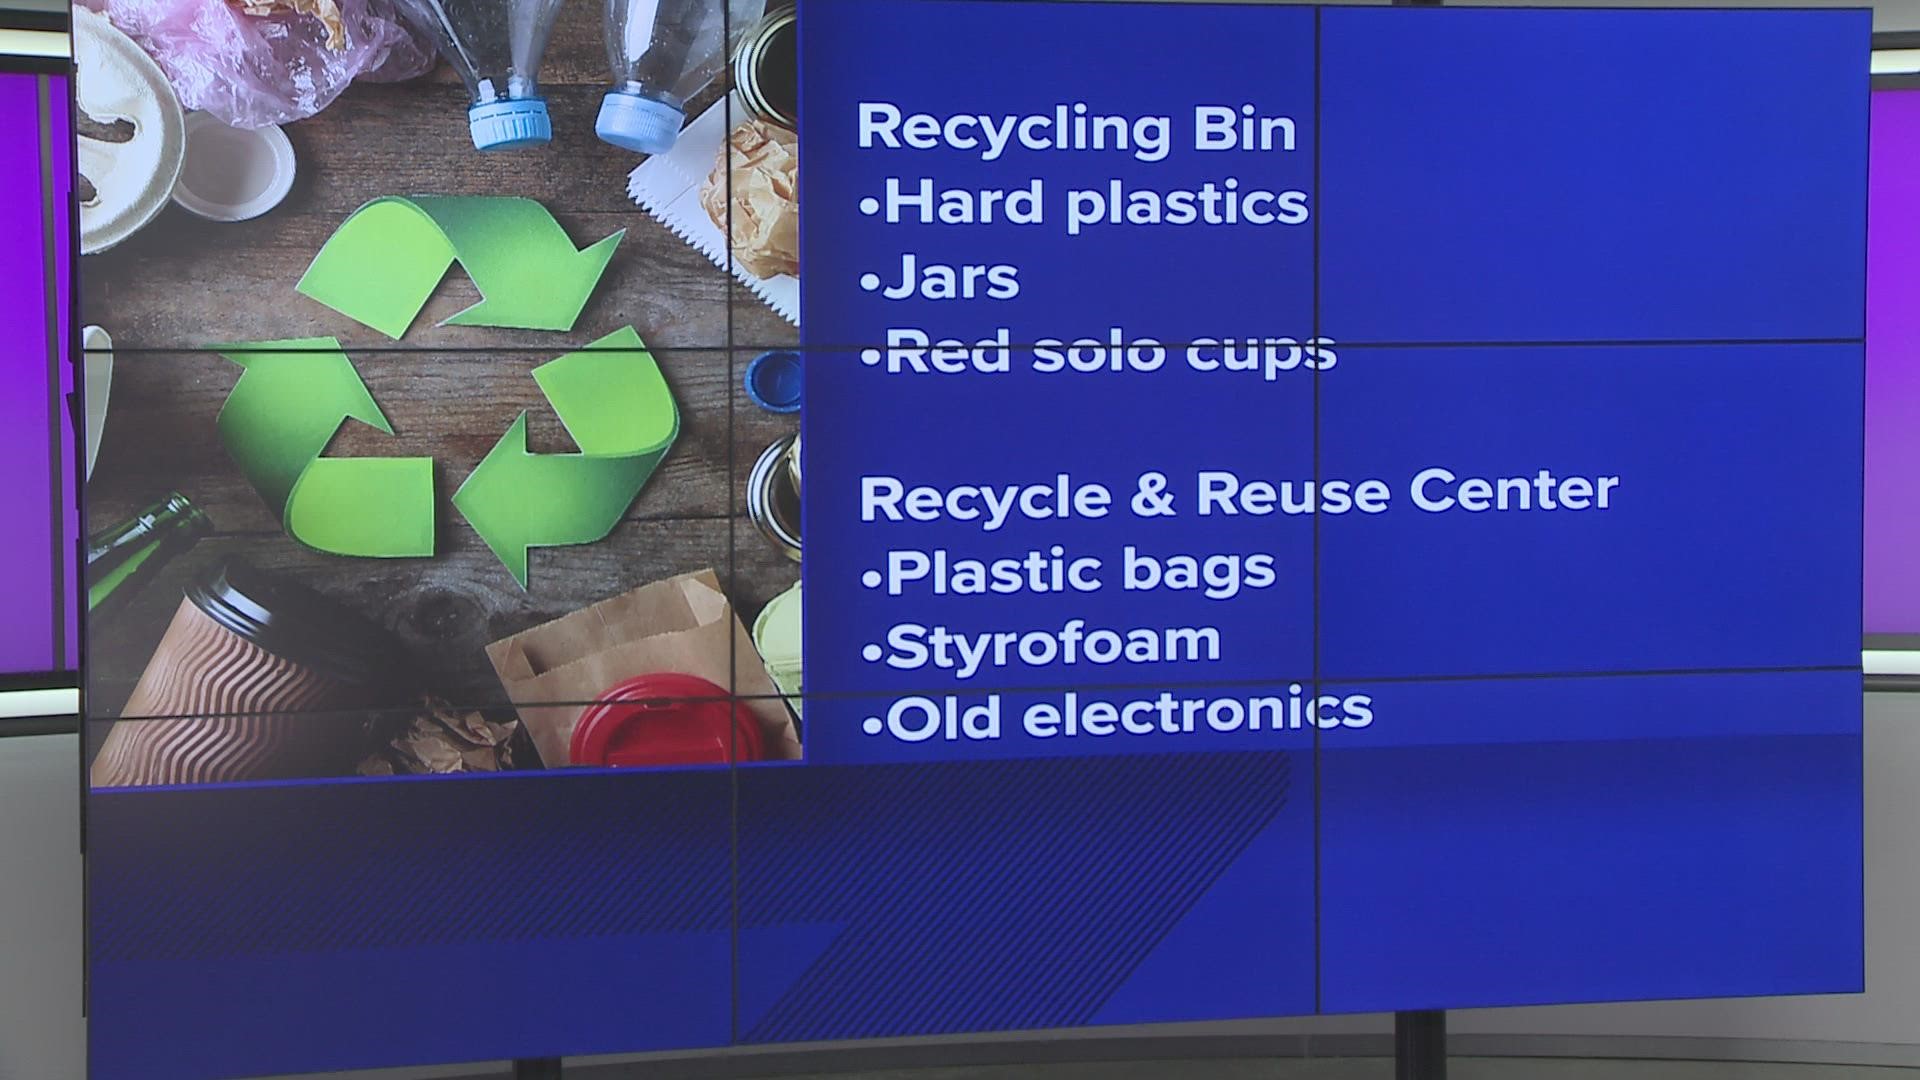 Let's clear up some common misconceptions about recycling.